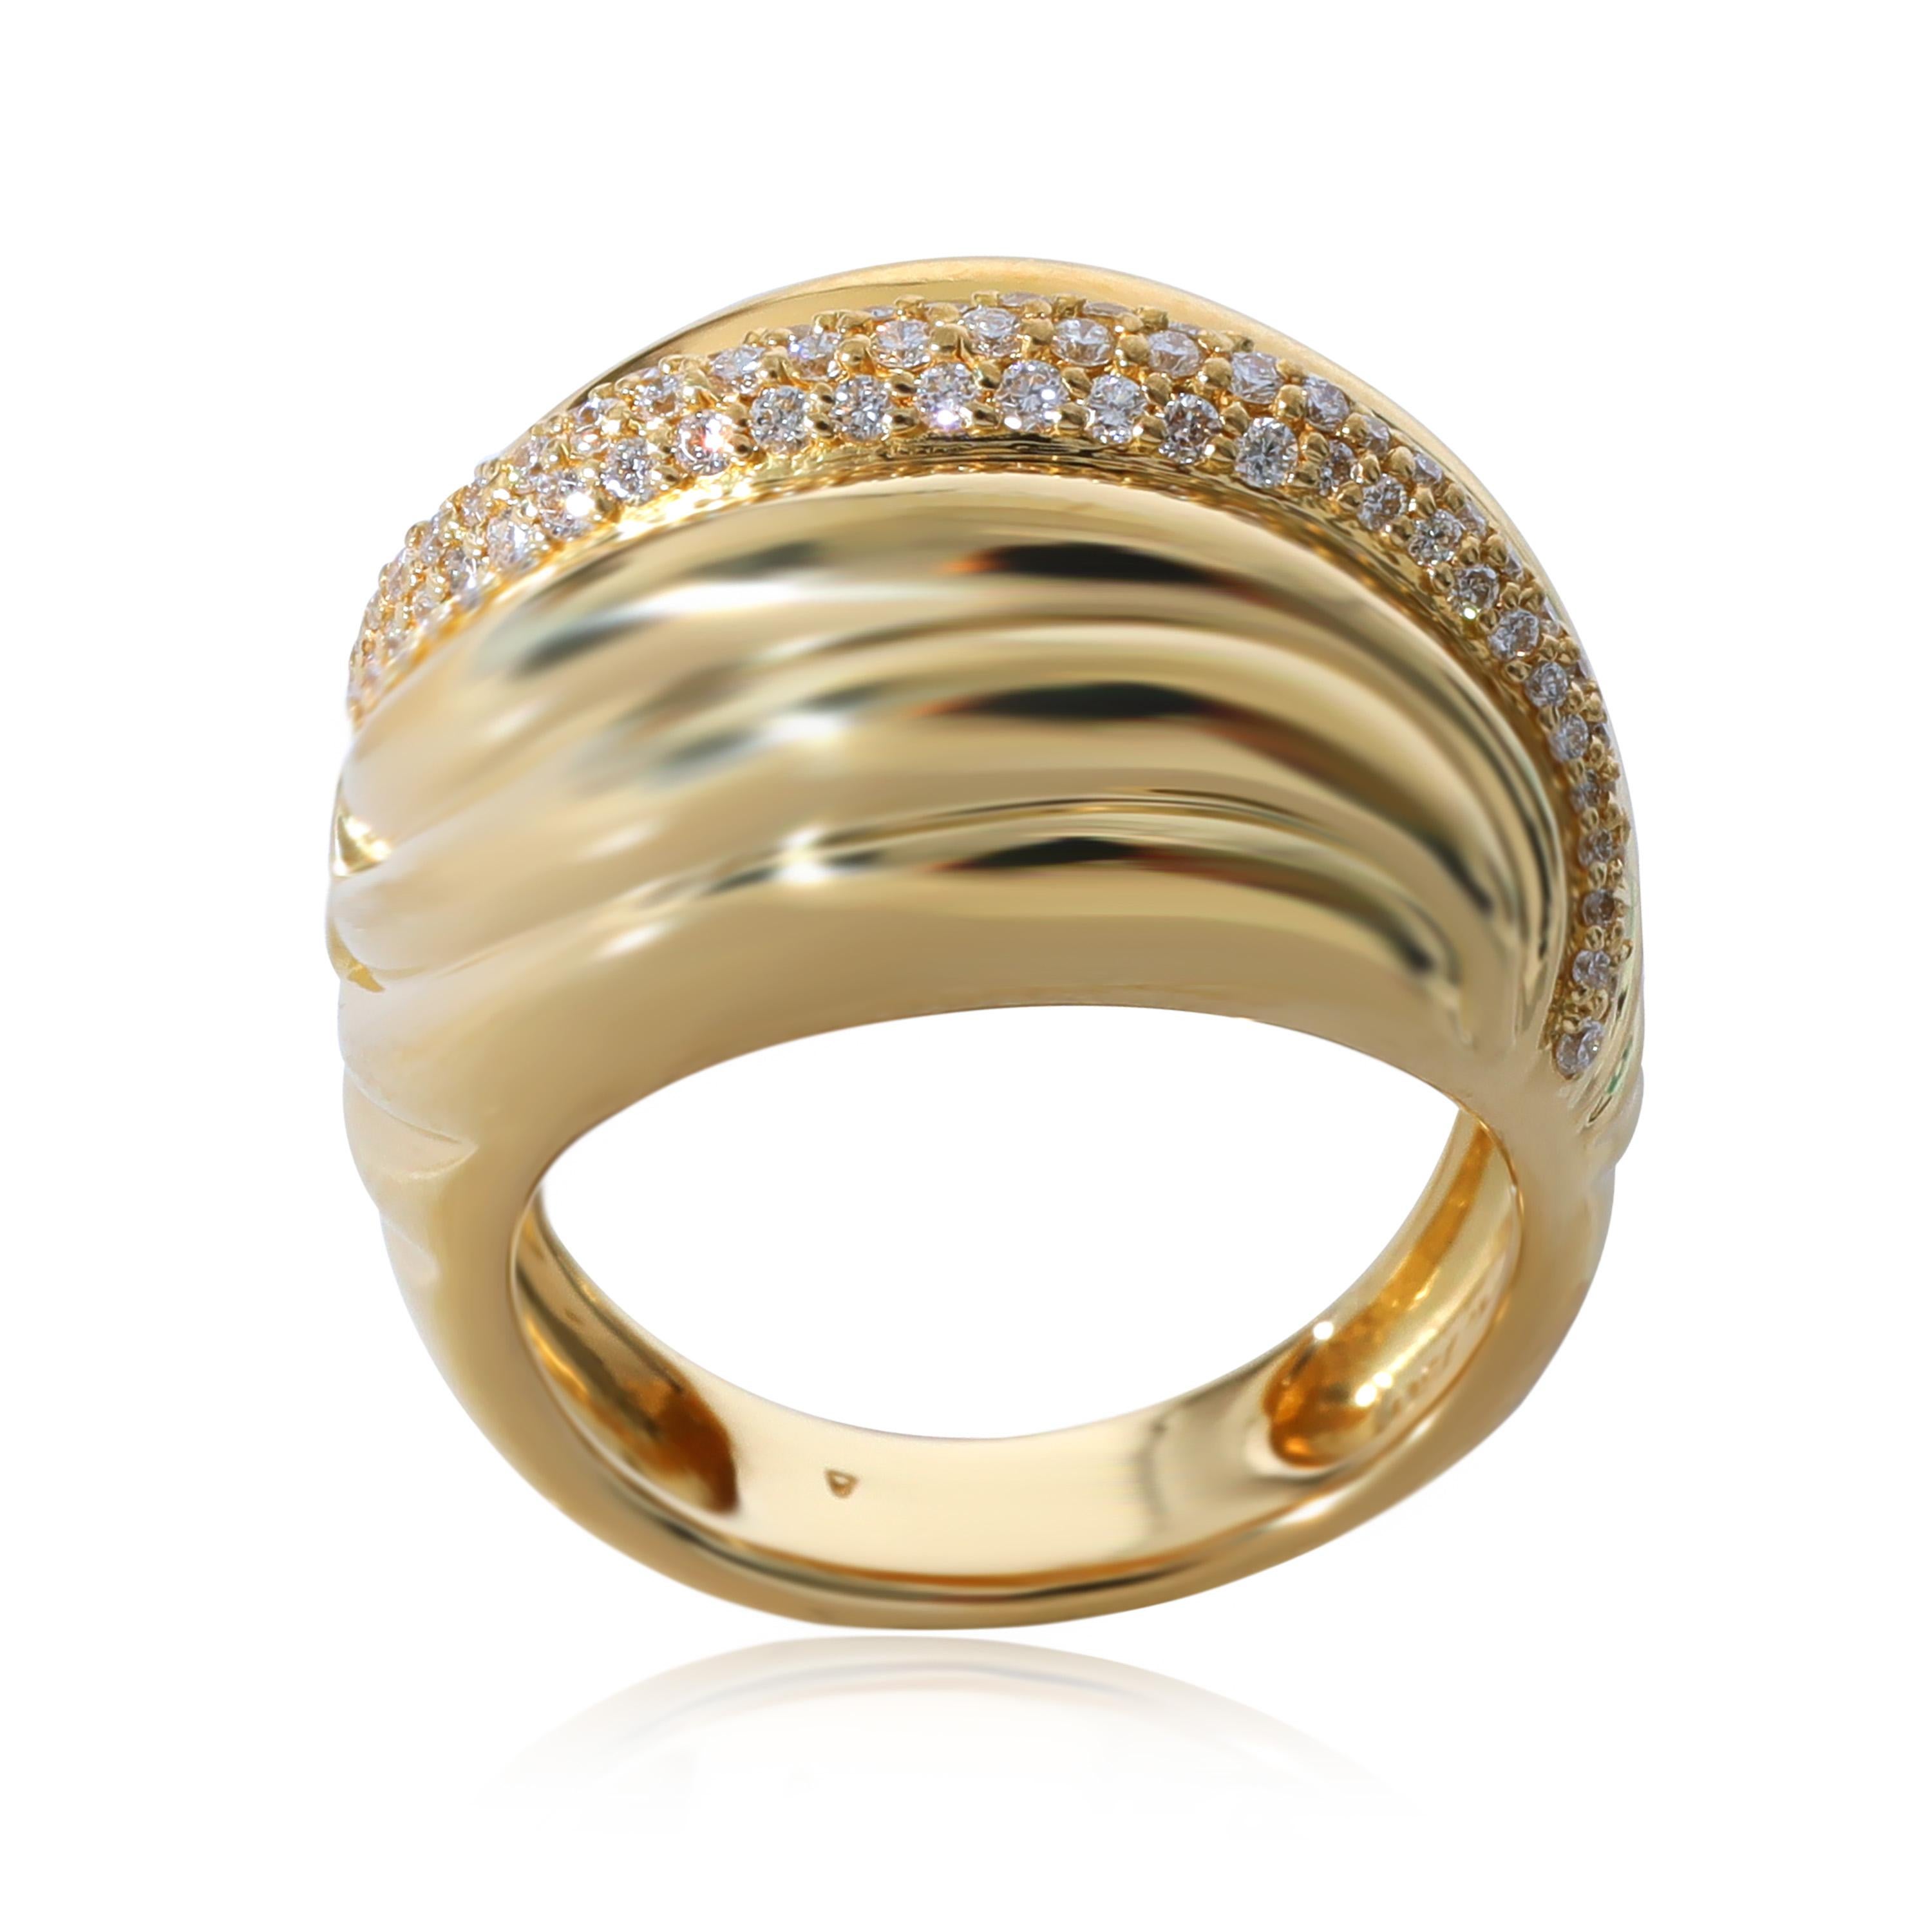 David Yurman Sculpted Cable Dome Ring in 18k Yellow Gold 0.49 CTW

PRIMARY DETAILS
SKU: 130373
Listing Title: David Yurman Sculpted Cable Dome Ring in 18k Yellow Gold 0.49 CTW
Condition Description: Retails for 4995 USD. In excellent condition and